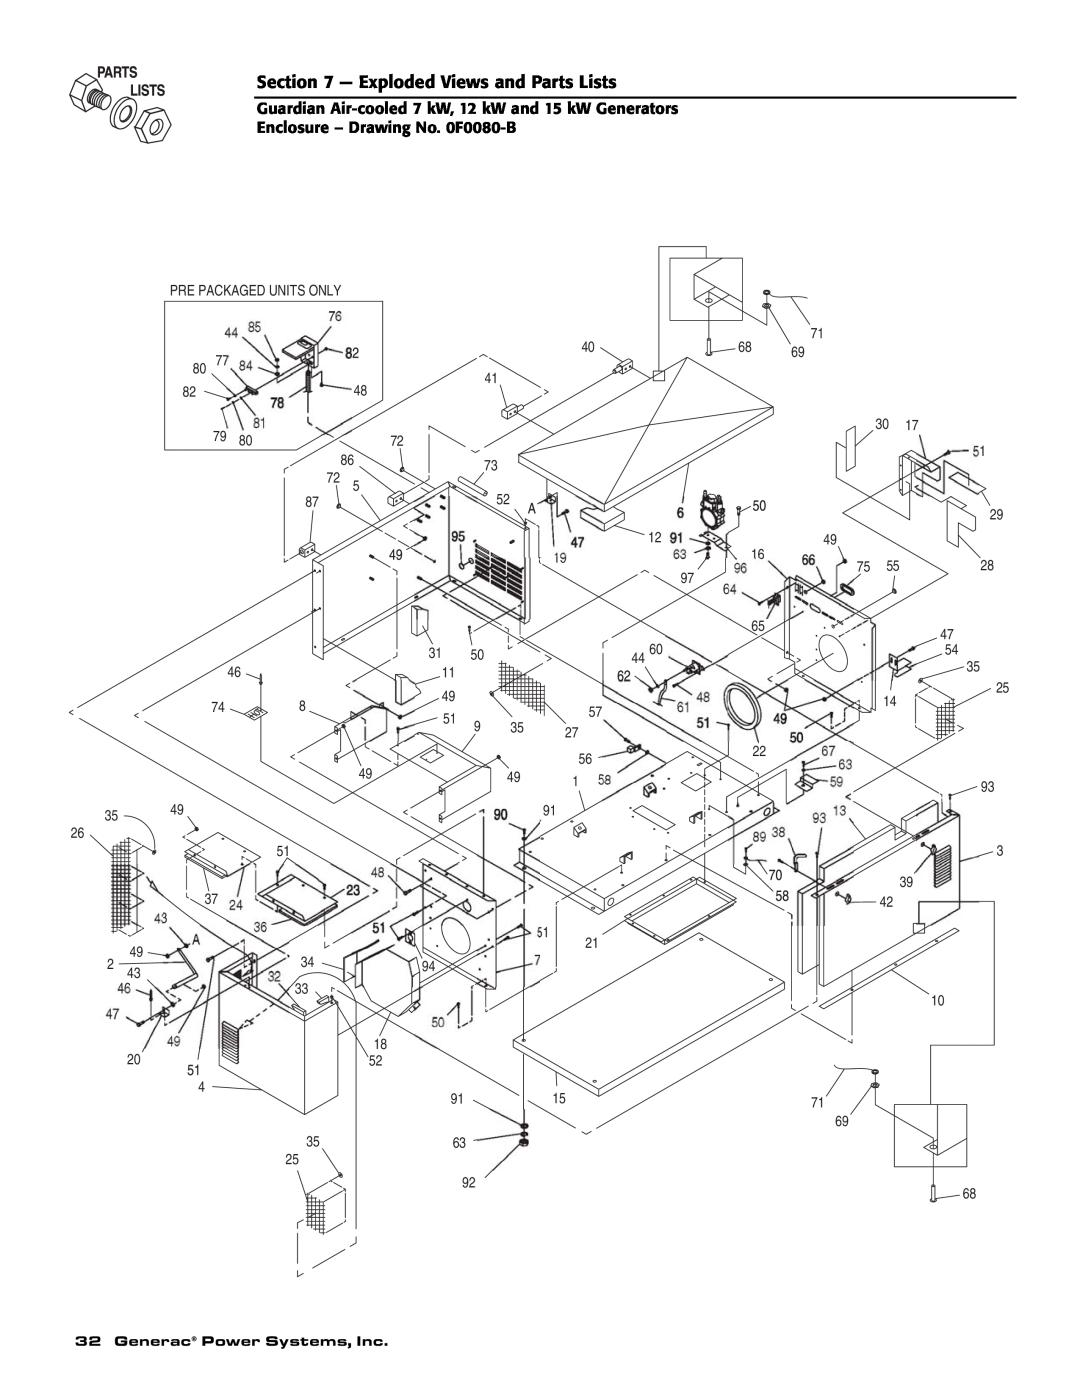 Generac Power Systems 04758-2, 04759-2, 04760-2 owner manual Exploded Views and Parts Lists, Generac Power Systems, Inc 